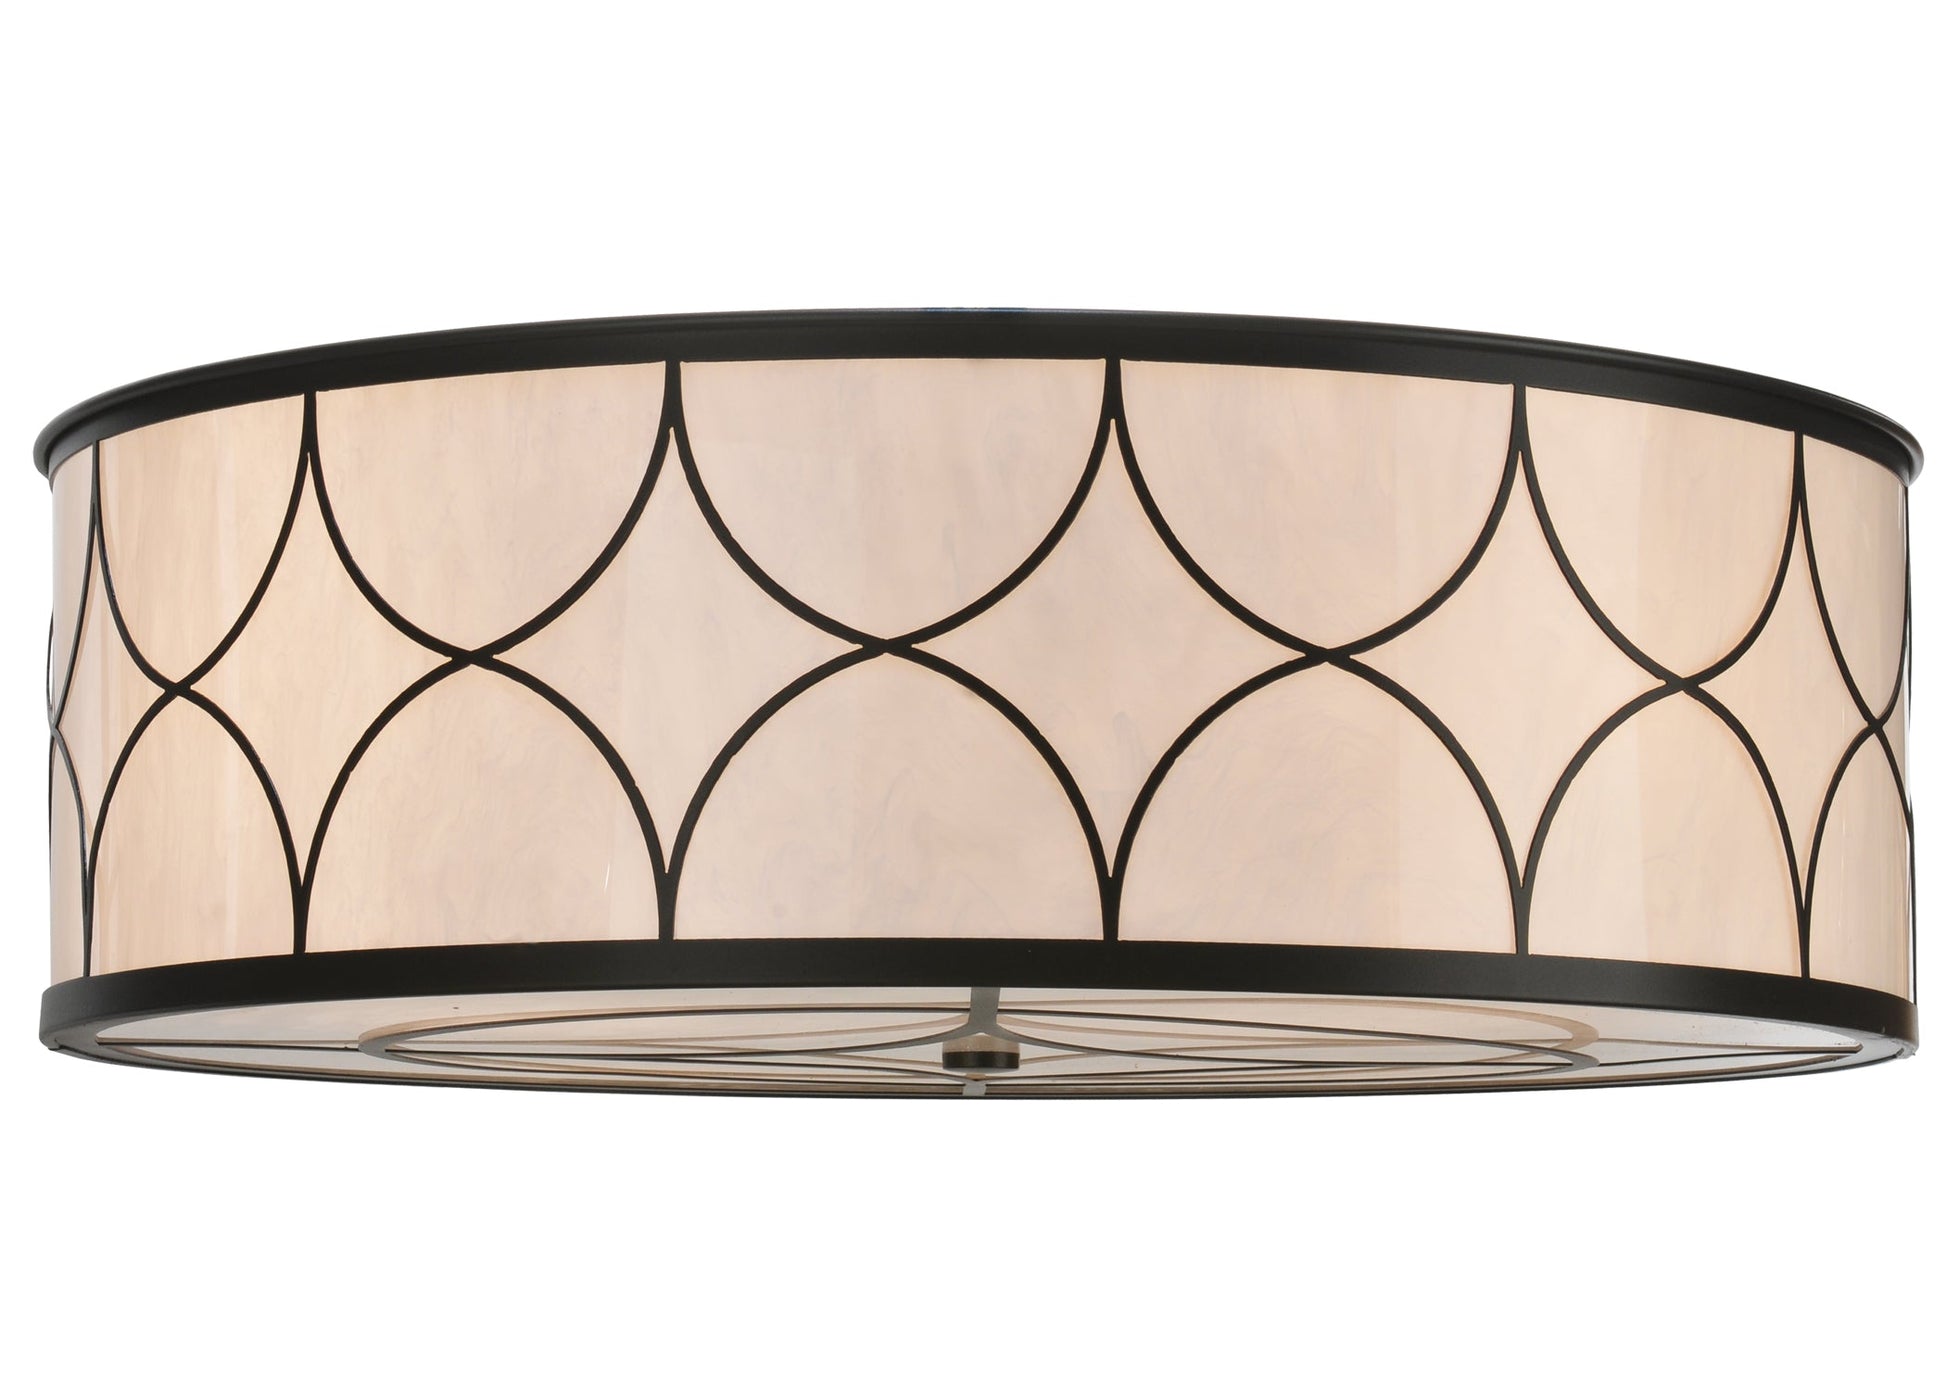 36" Revival Deco Cilindro Flushmount by 2nd Ave Lighting